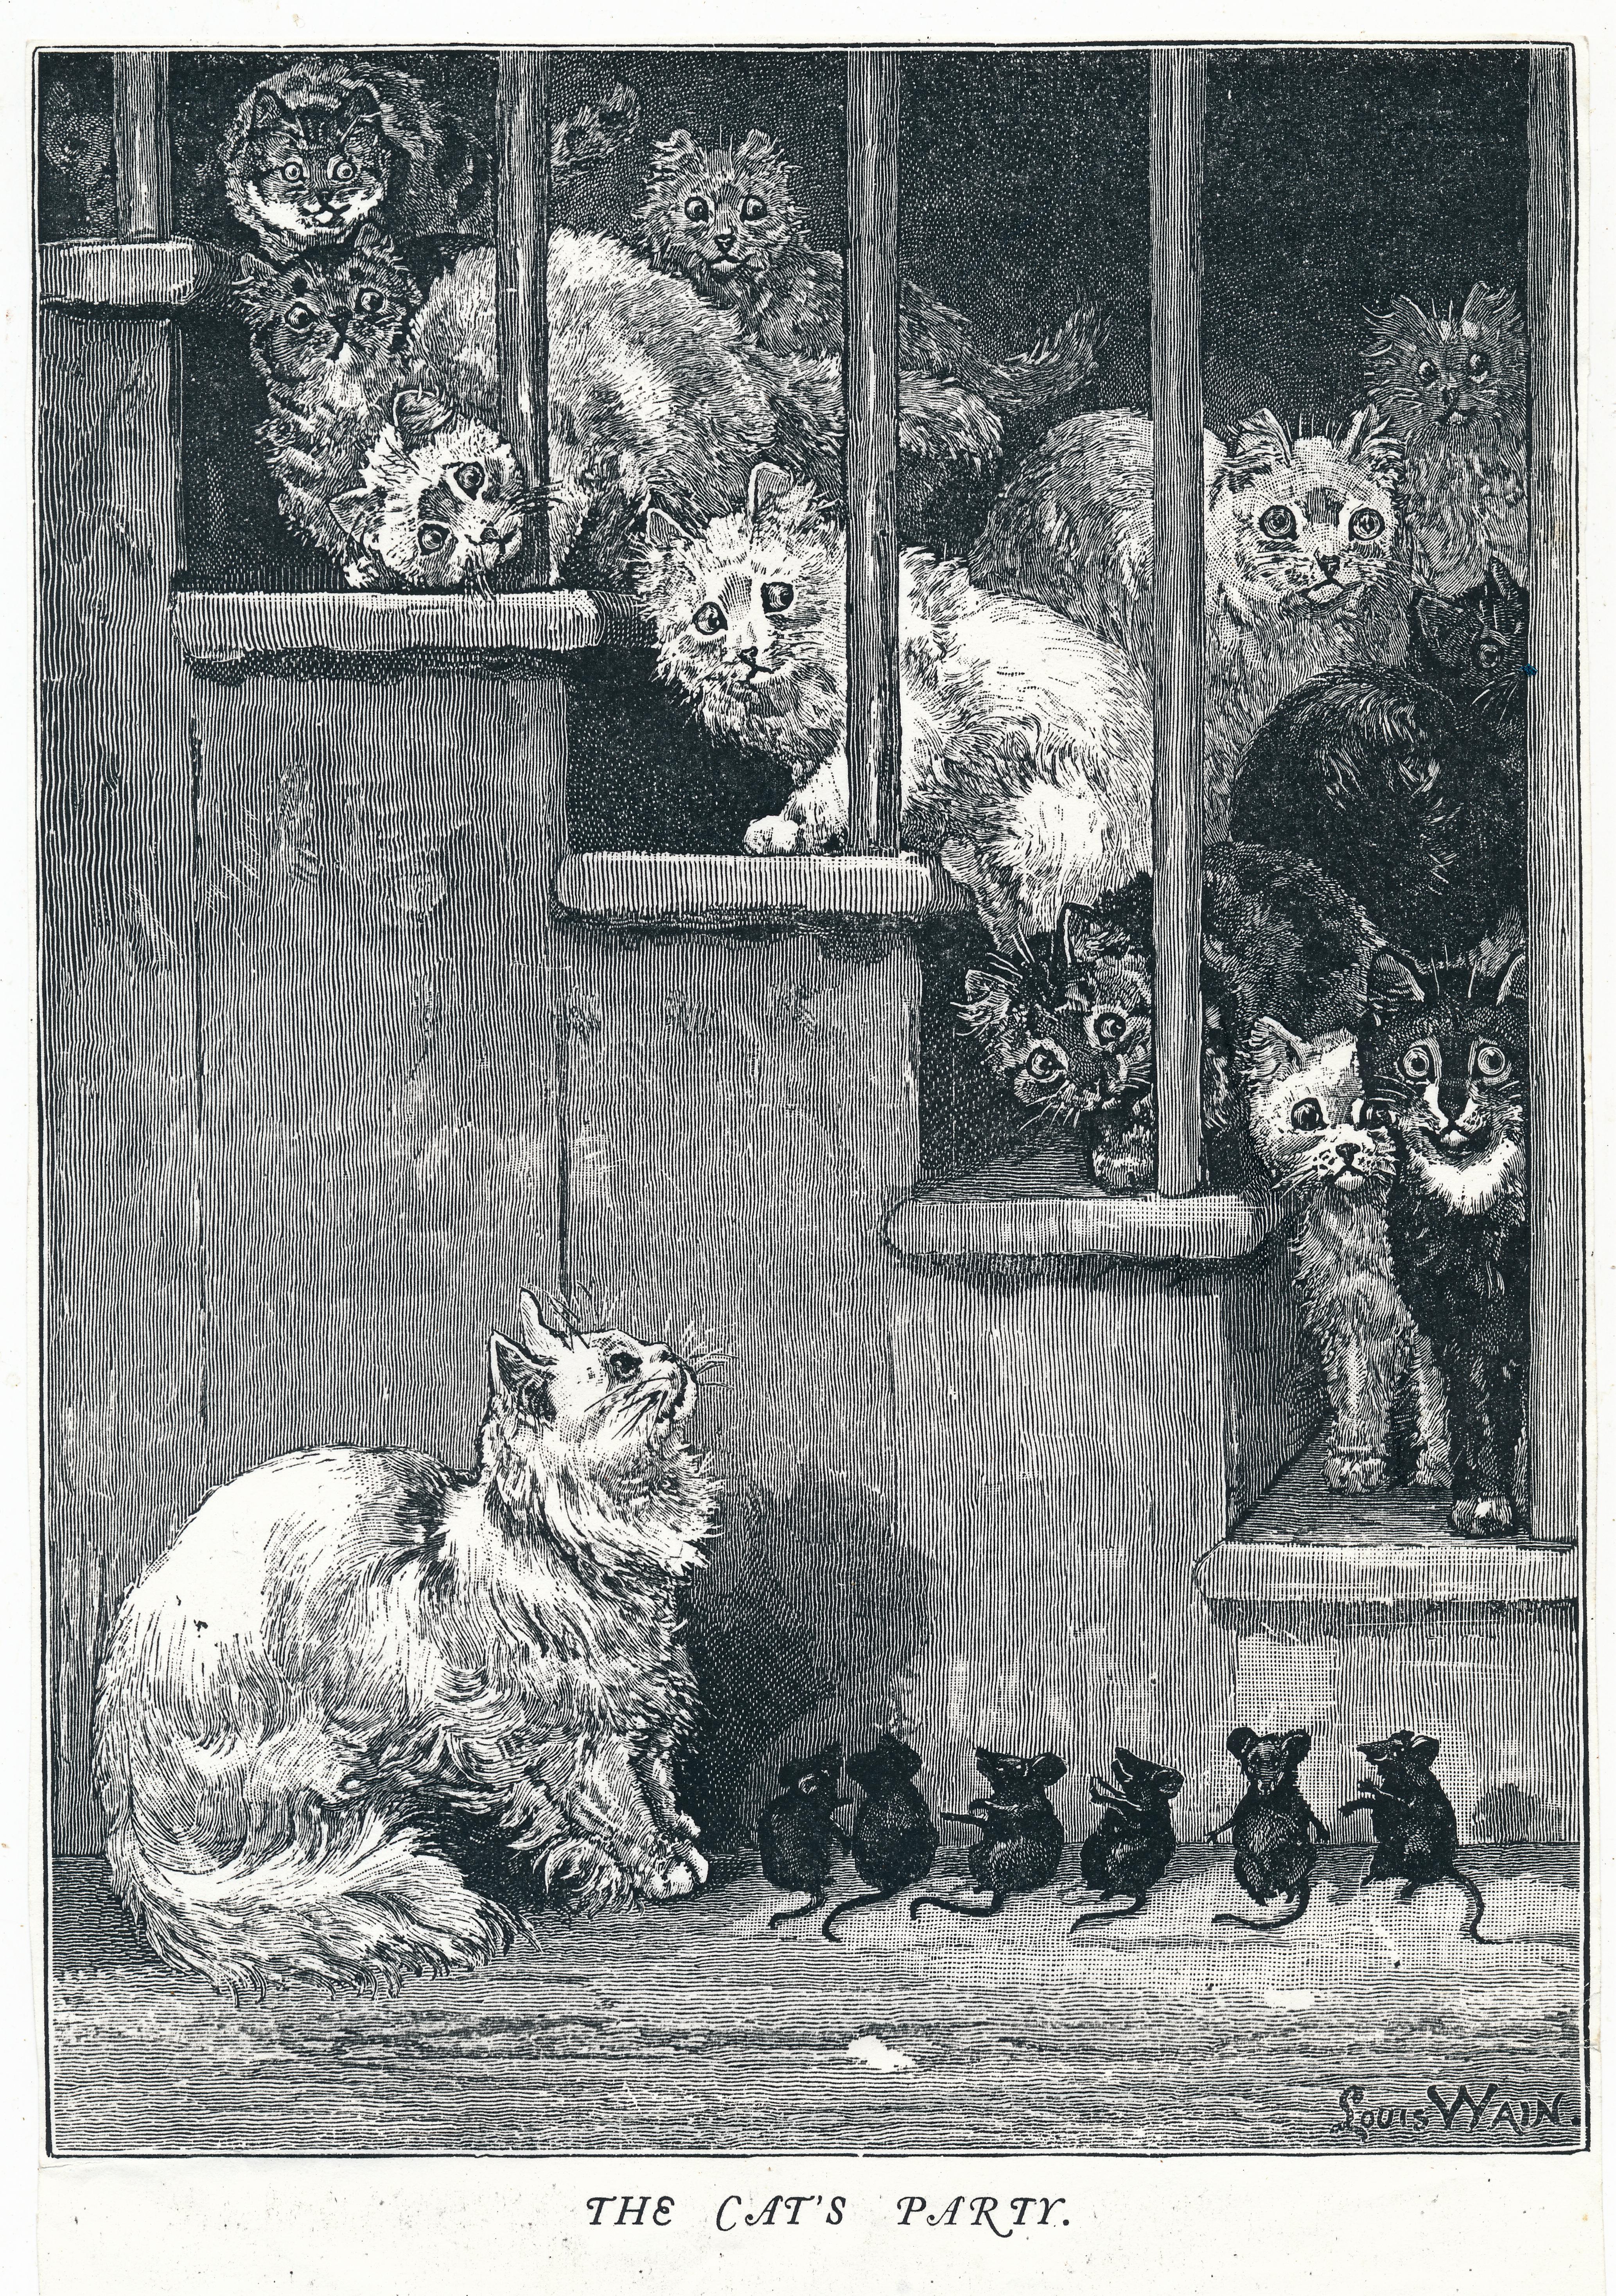 Louis Wain illustration with: black_and_white, book, book:unknown, caption, cat, cat:tuxedo, color:black, color:grey, color:white, indoors, manysubjects, meta:has_source, meta:needsyear, mouse, profile, realistic, signature, swarm